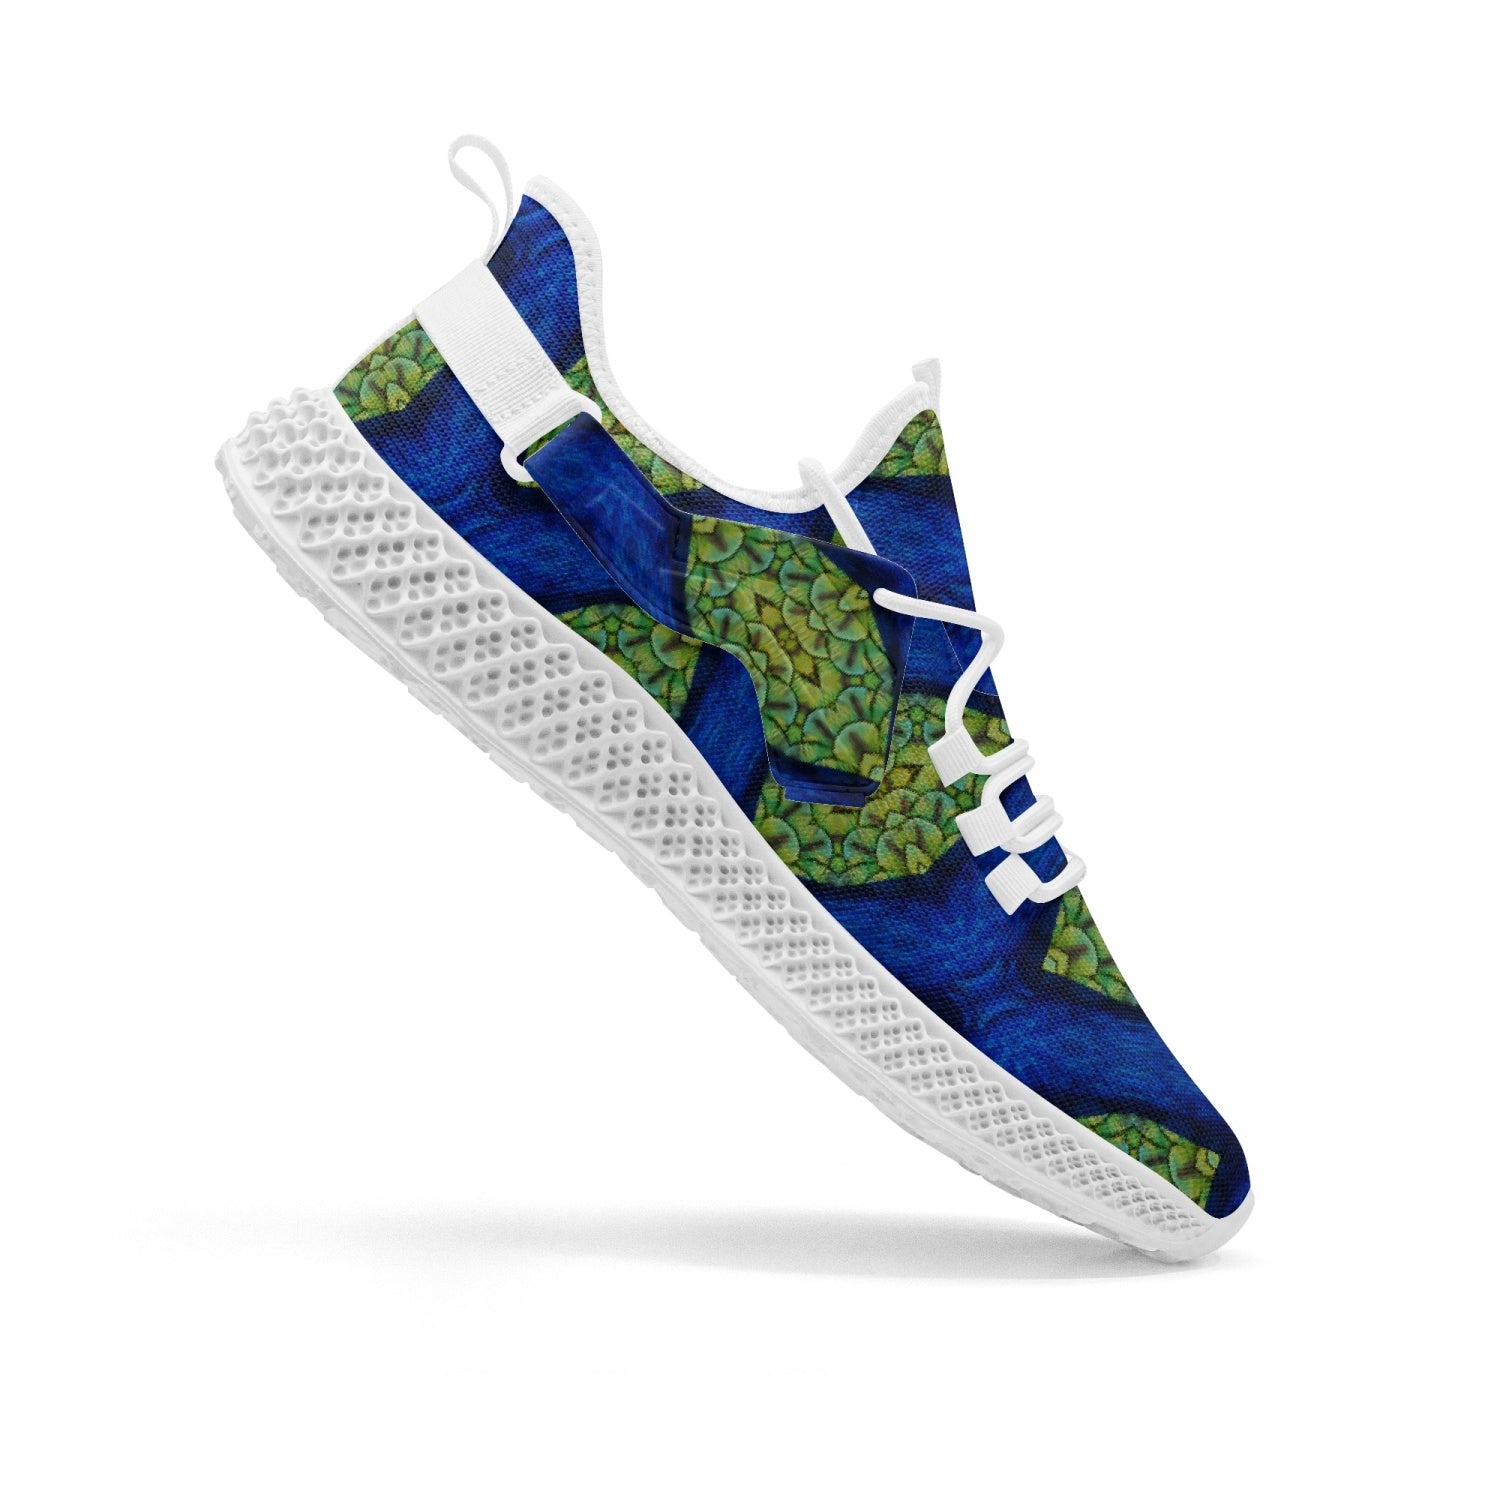 The Heart and Brain Connection,   Net Style Mesh Knit Sneakers, by Sensus Studio Design